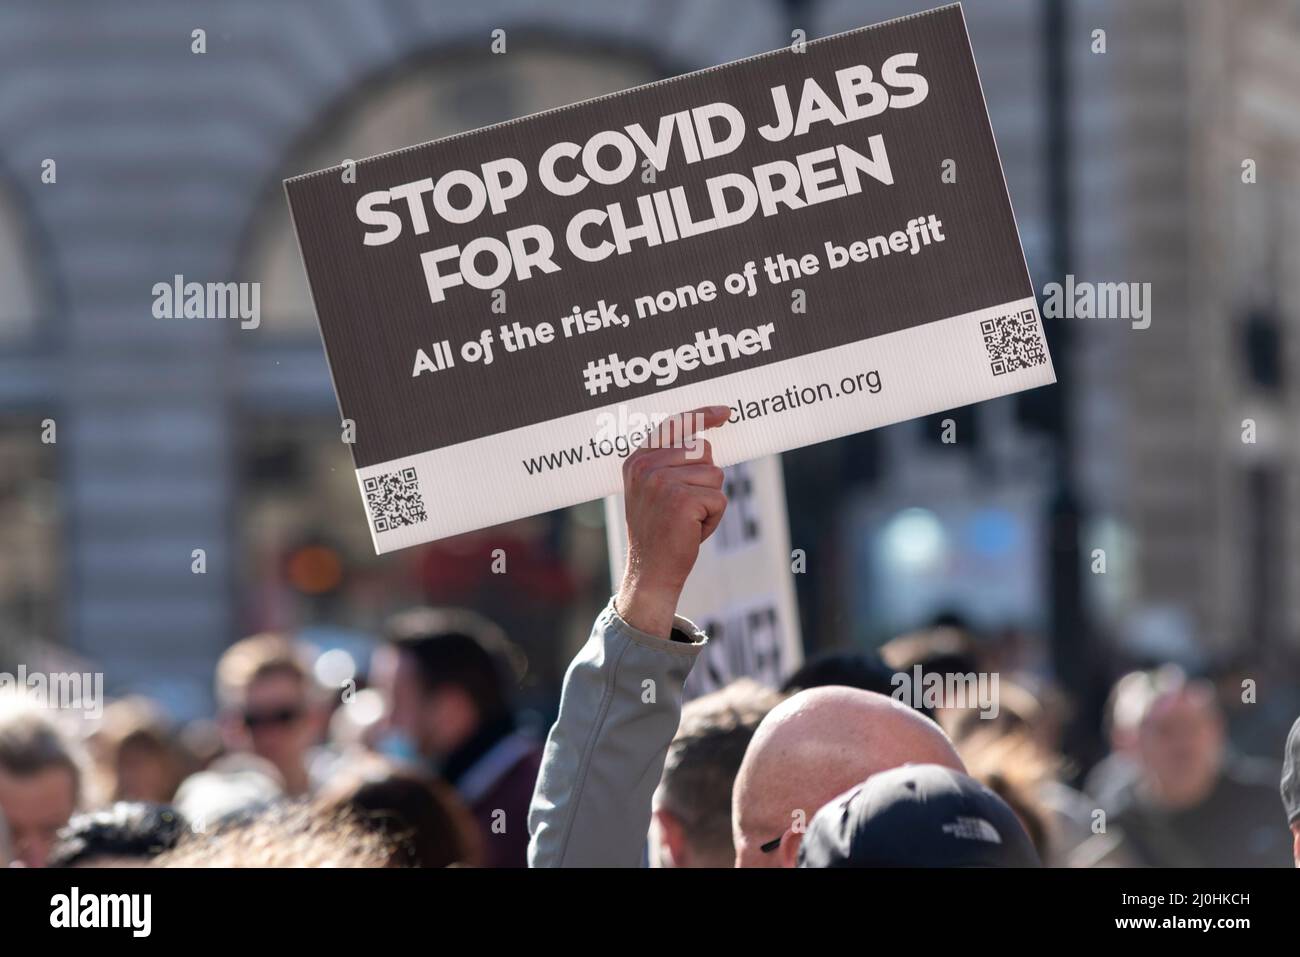 Westminster, London, UK. 19th Mar, 2022.A protest is taking place against vaccinating children for Covid 19, joined by anti-vaxxers. Stop covid jabs for children placard. All of the risk, none of the benefit. #together Stock Photo